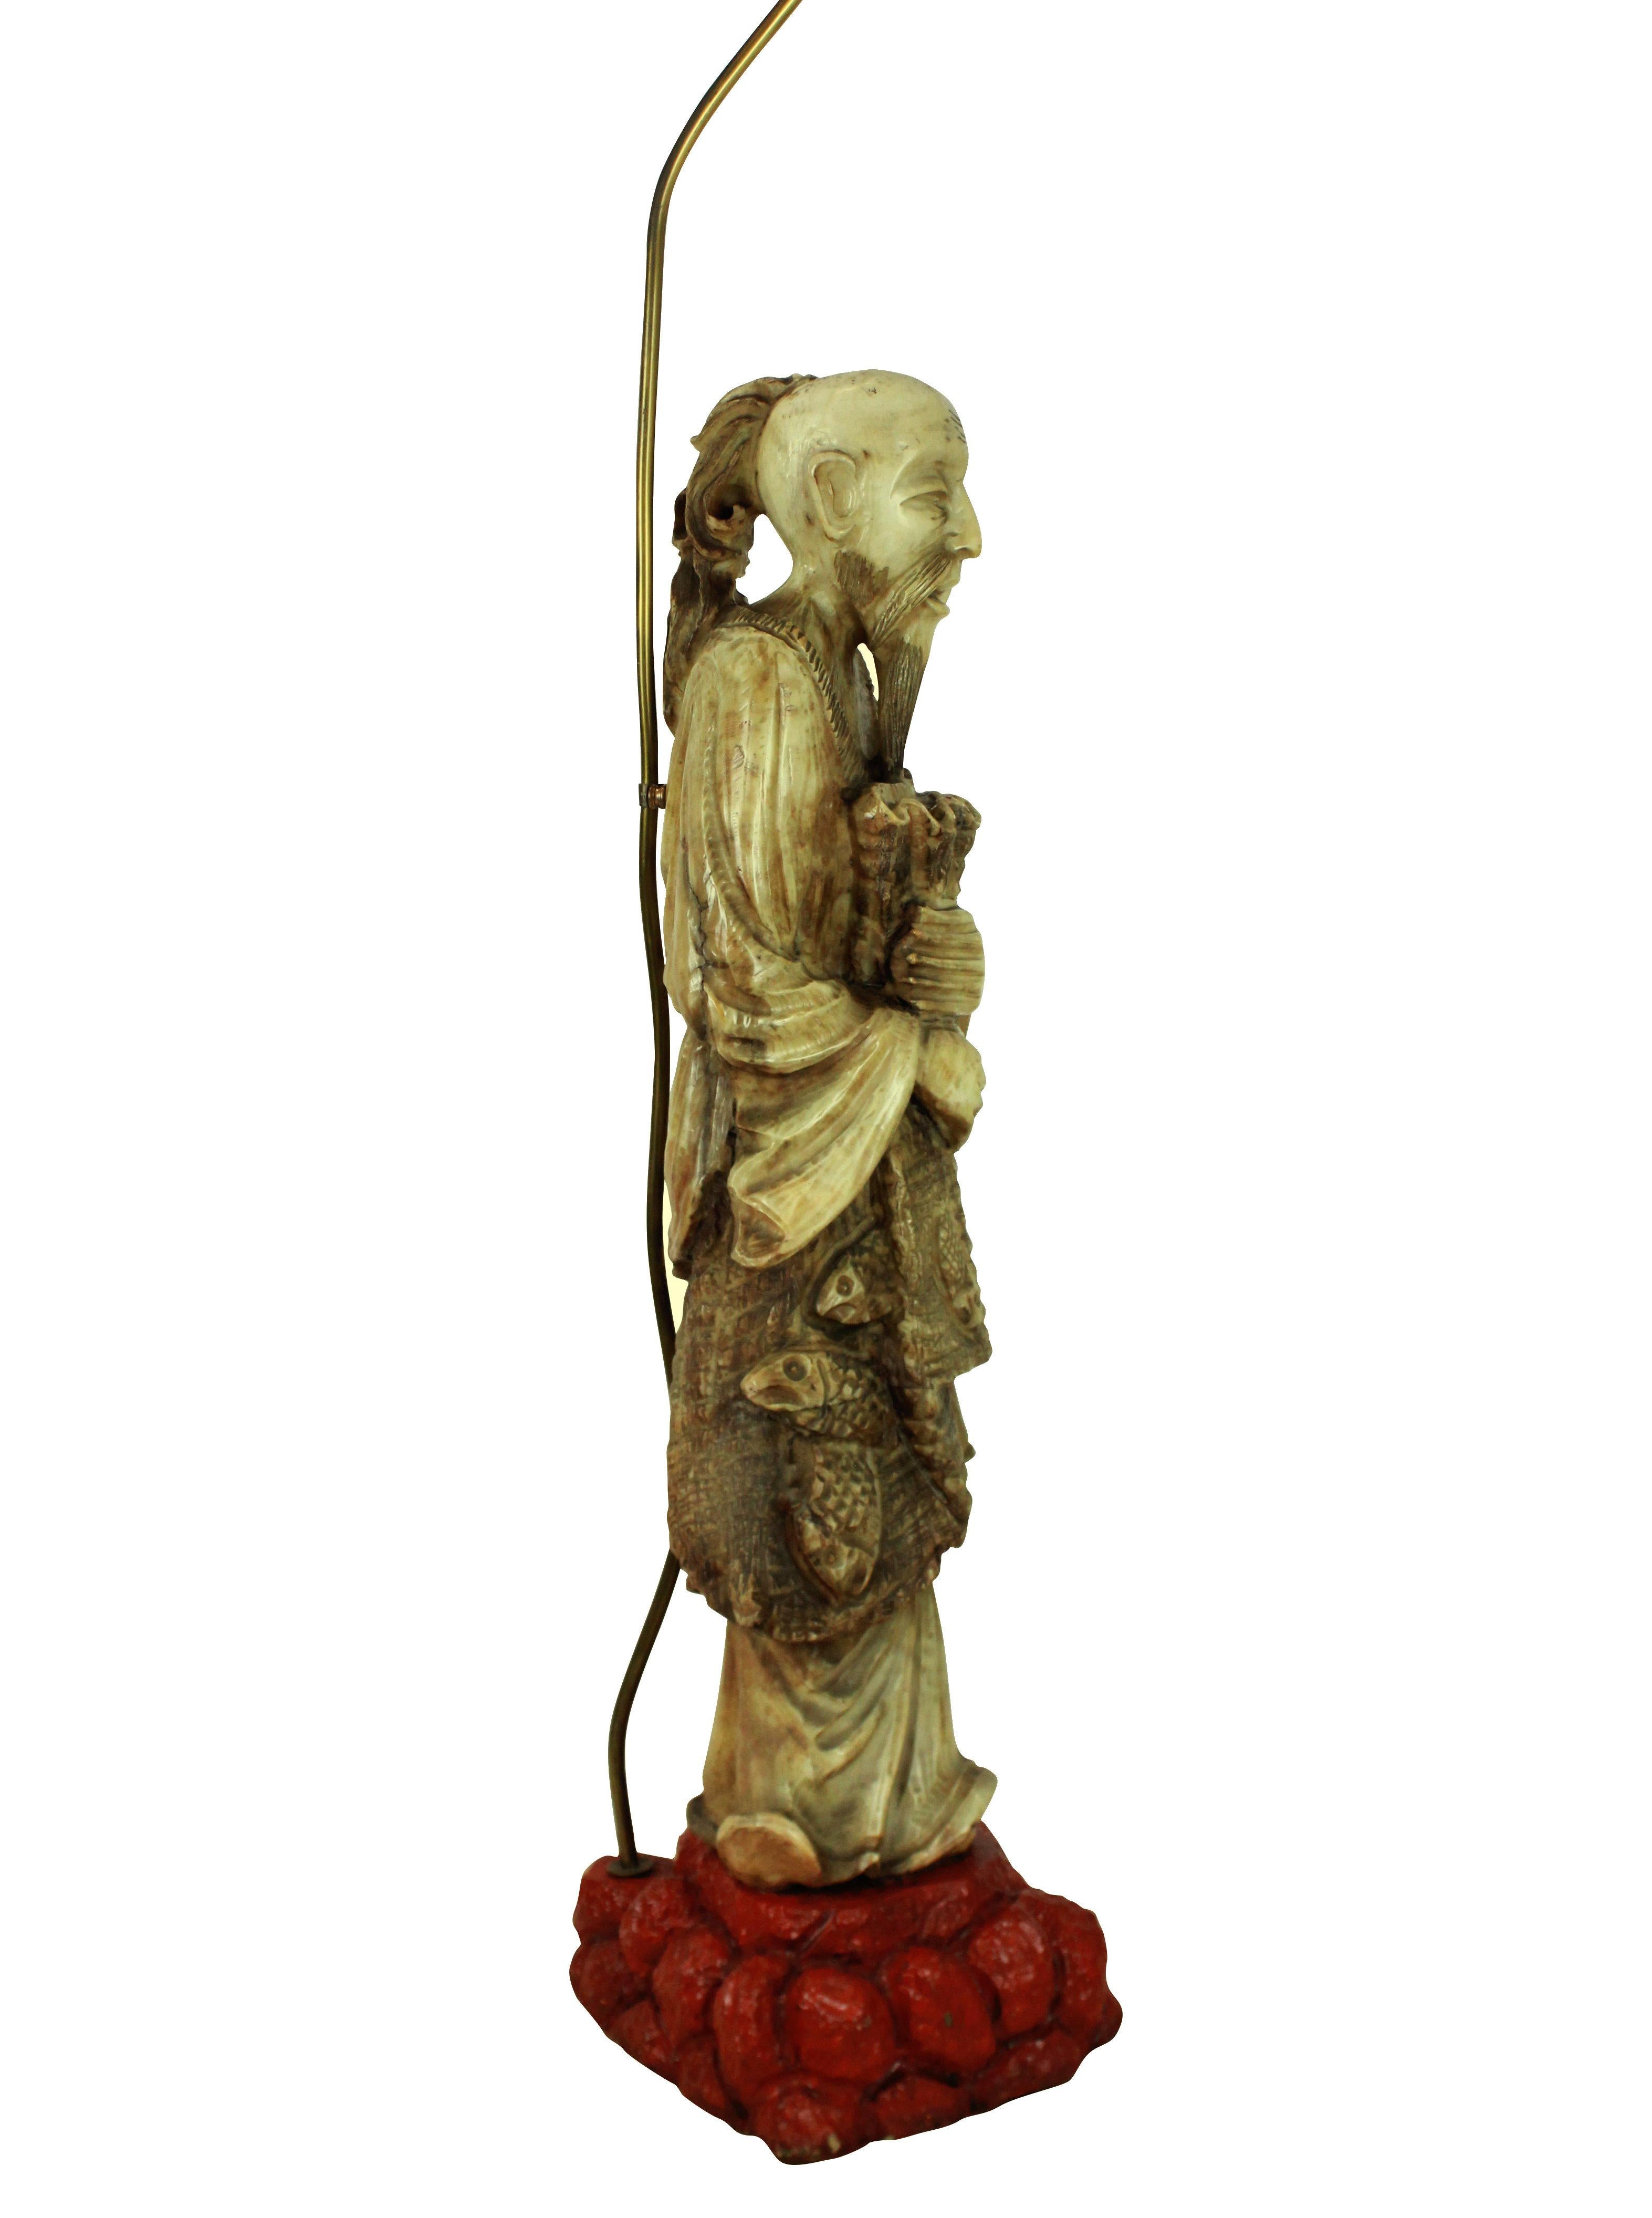 A finely carved alabaster Chinese figure with a great patina and color, mounted on a red lacquered stone base, converted into a floor lamp.